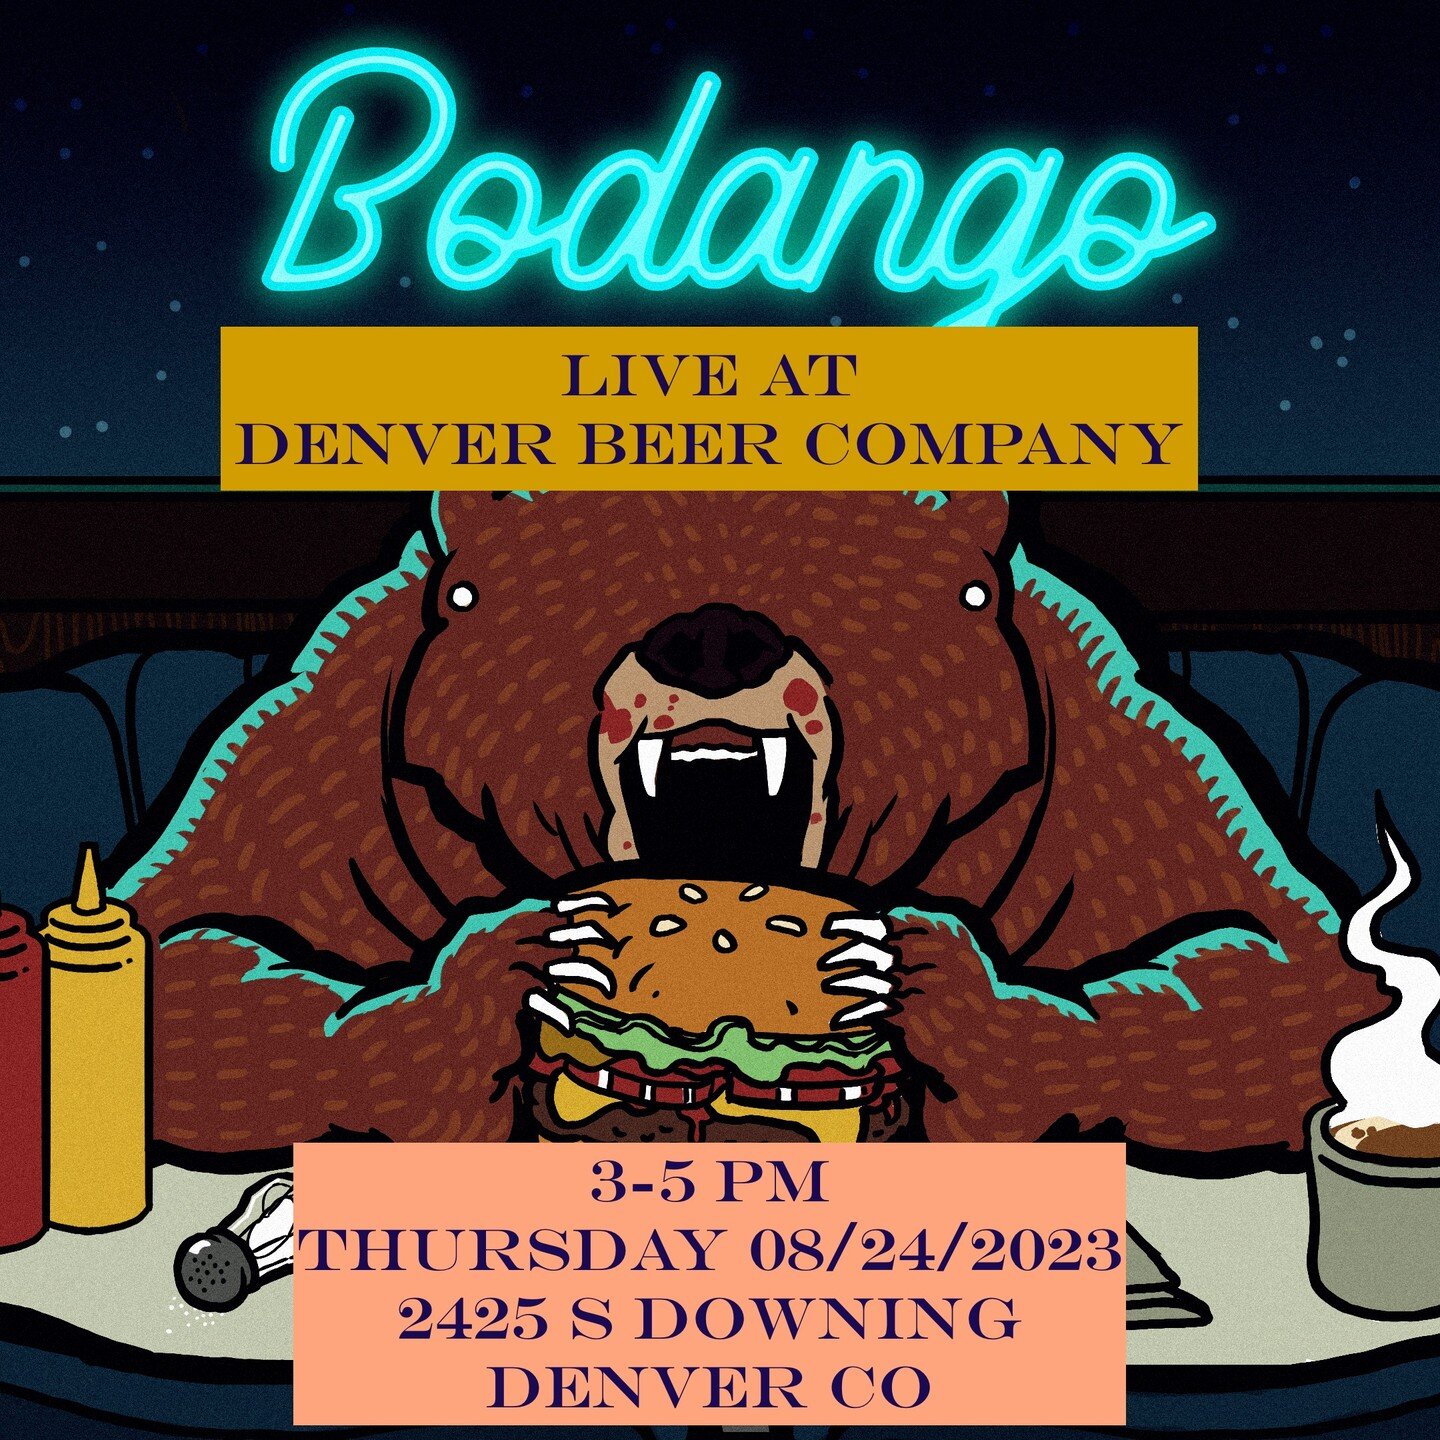 We're playing Denver Beer Company South Downing TOMORROW Thursday 08.24 from 3-5pm!!

Come thru for a frothy brew!